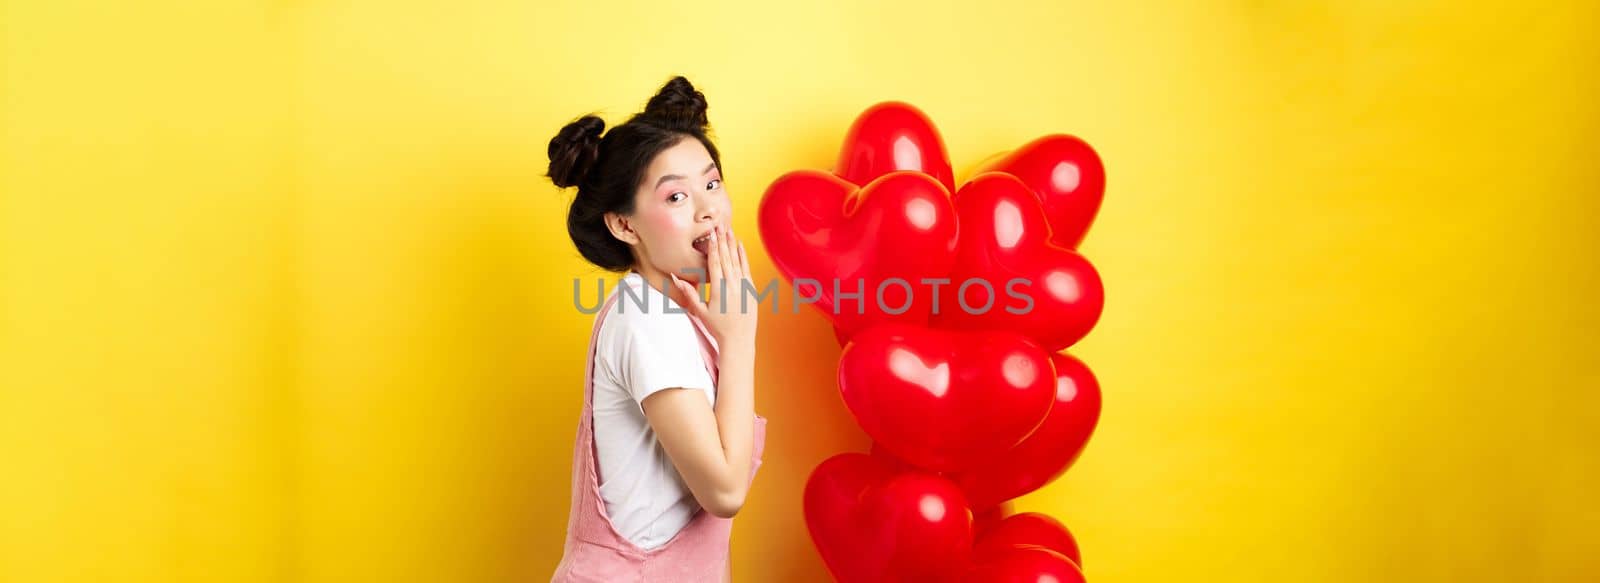 Valentines day and relationship concept. Coquettish and romantic girl laughing, covering mouth with hand, look silly at camera, standing near red heart balloons, yellow background.